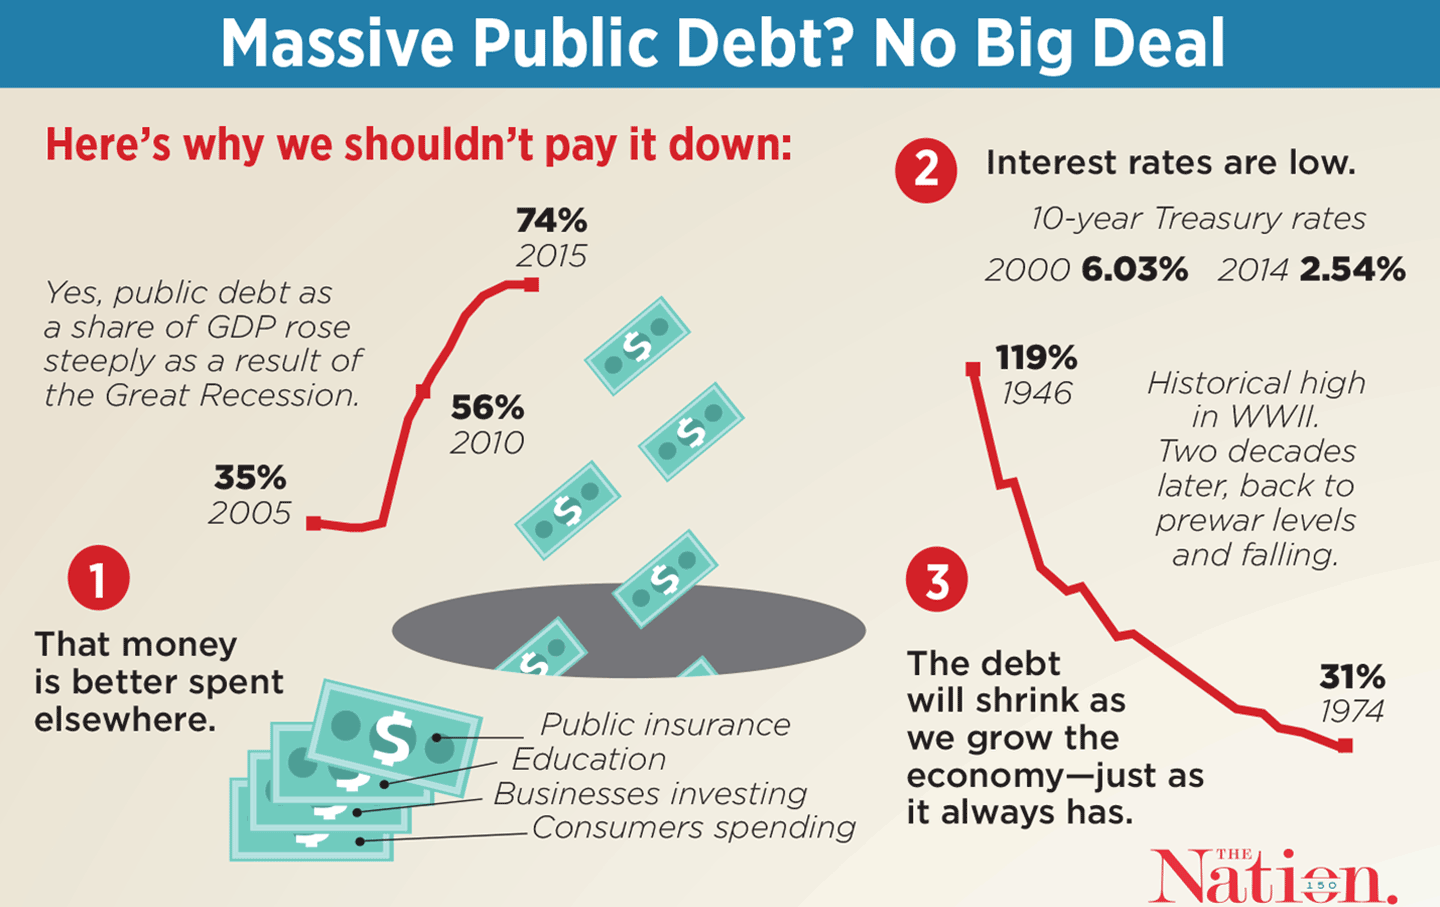 We Should Never Pay Down Our $17 Trillion Debt—Just Ask the IMF